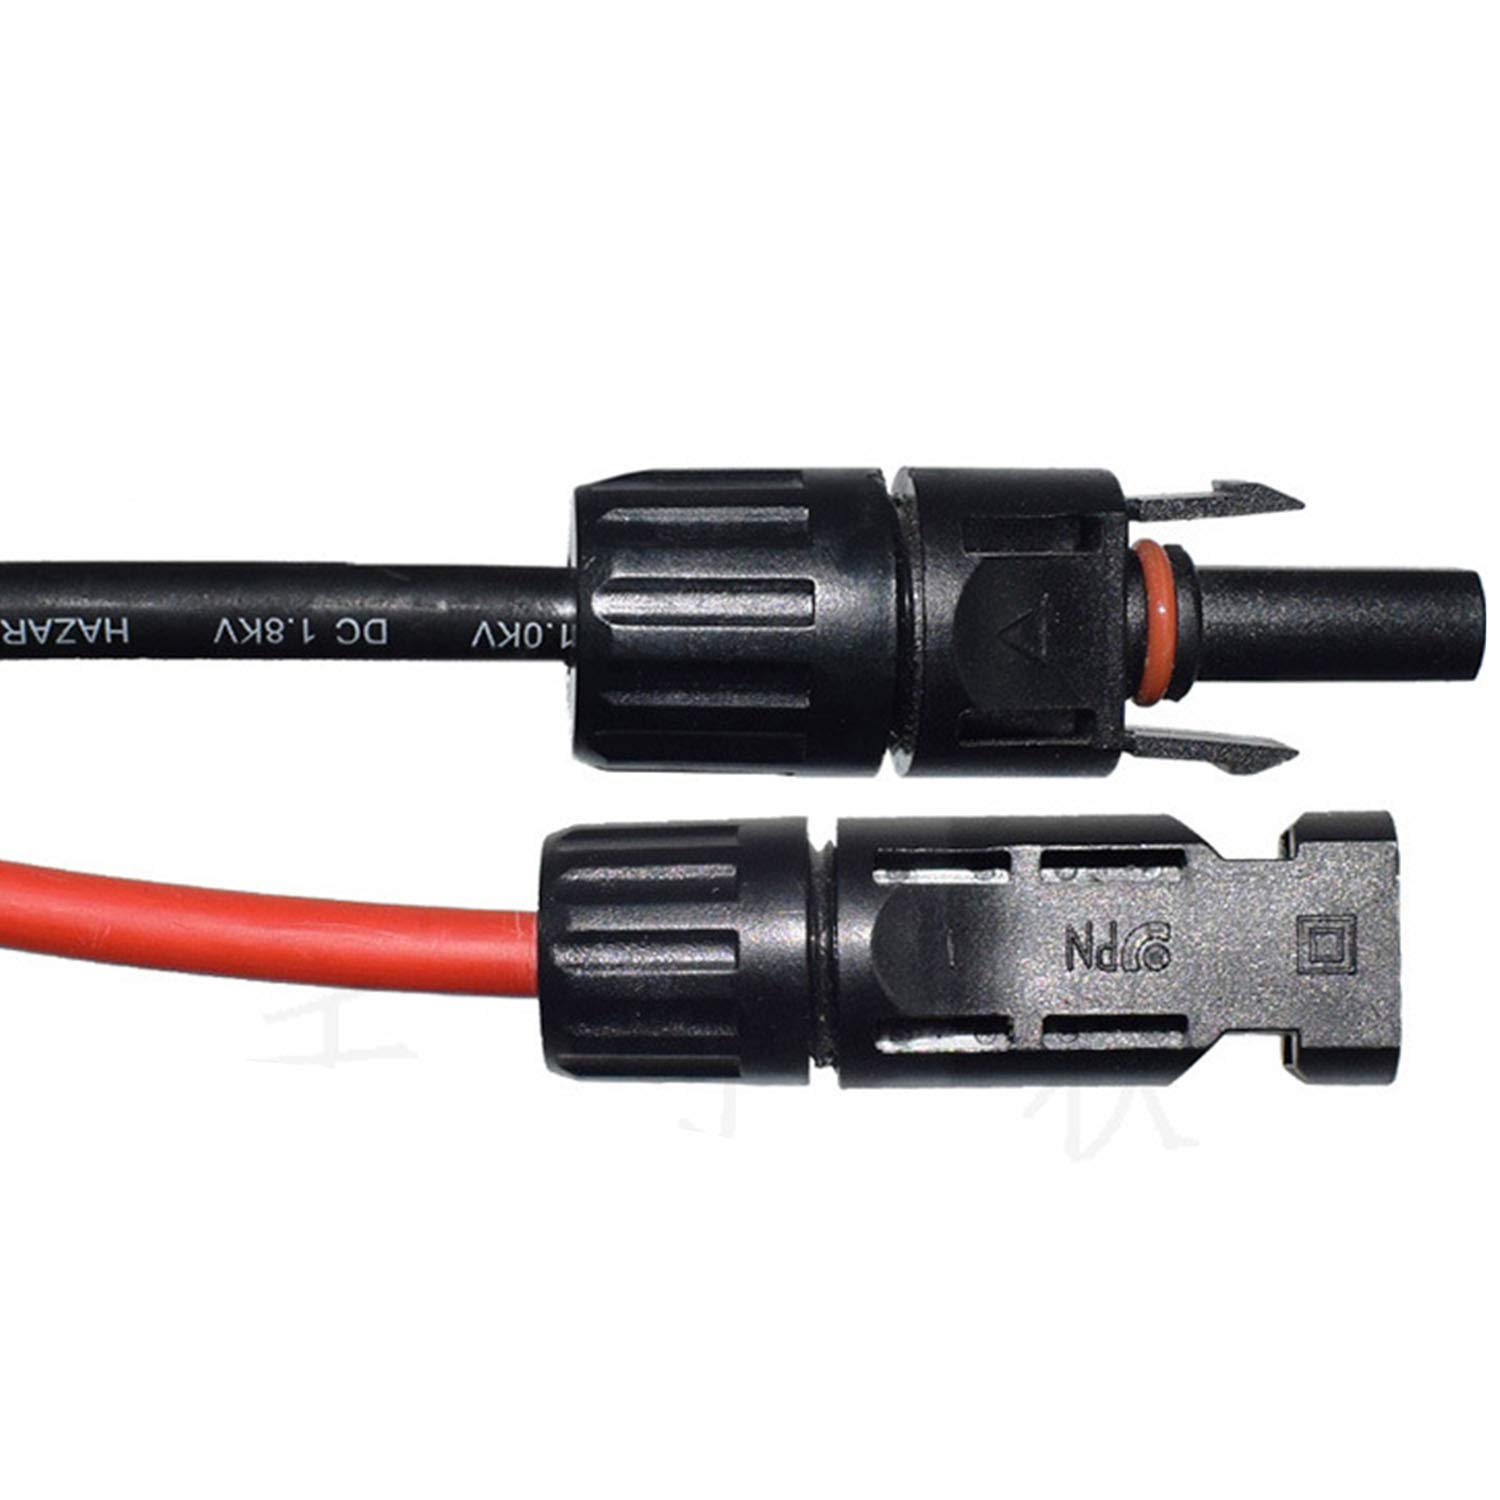 LIXINTIAN 3.3 Feet (4mm²) Solar Panel Extension Cable，with Female and Male Connectors (3.3FT Red+3.3FT Black)